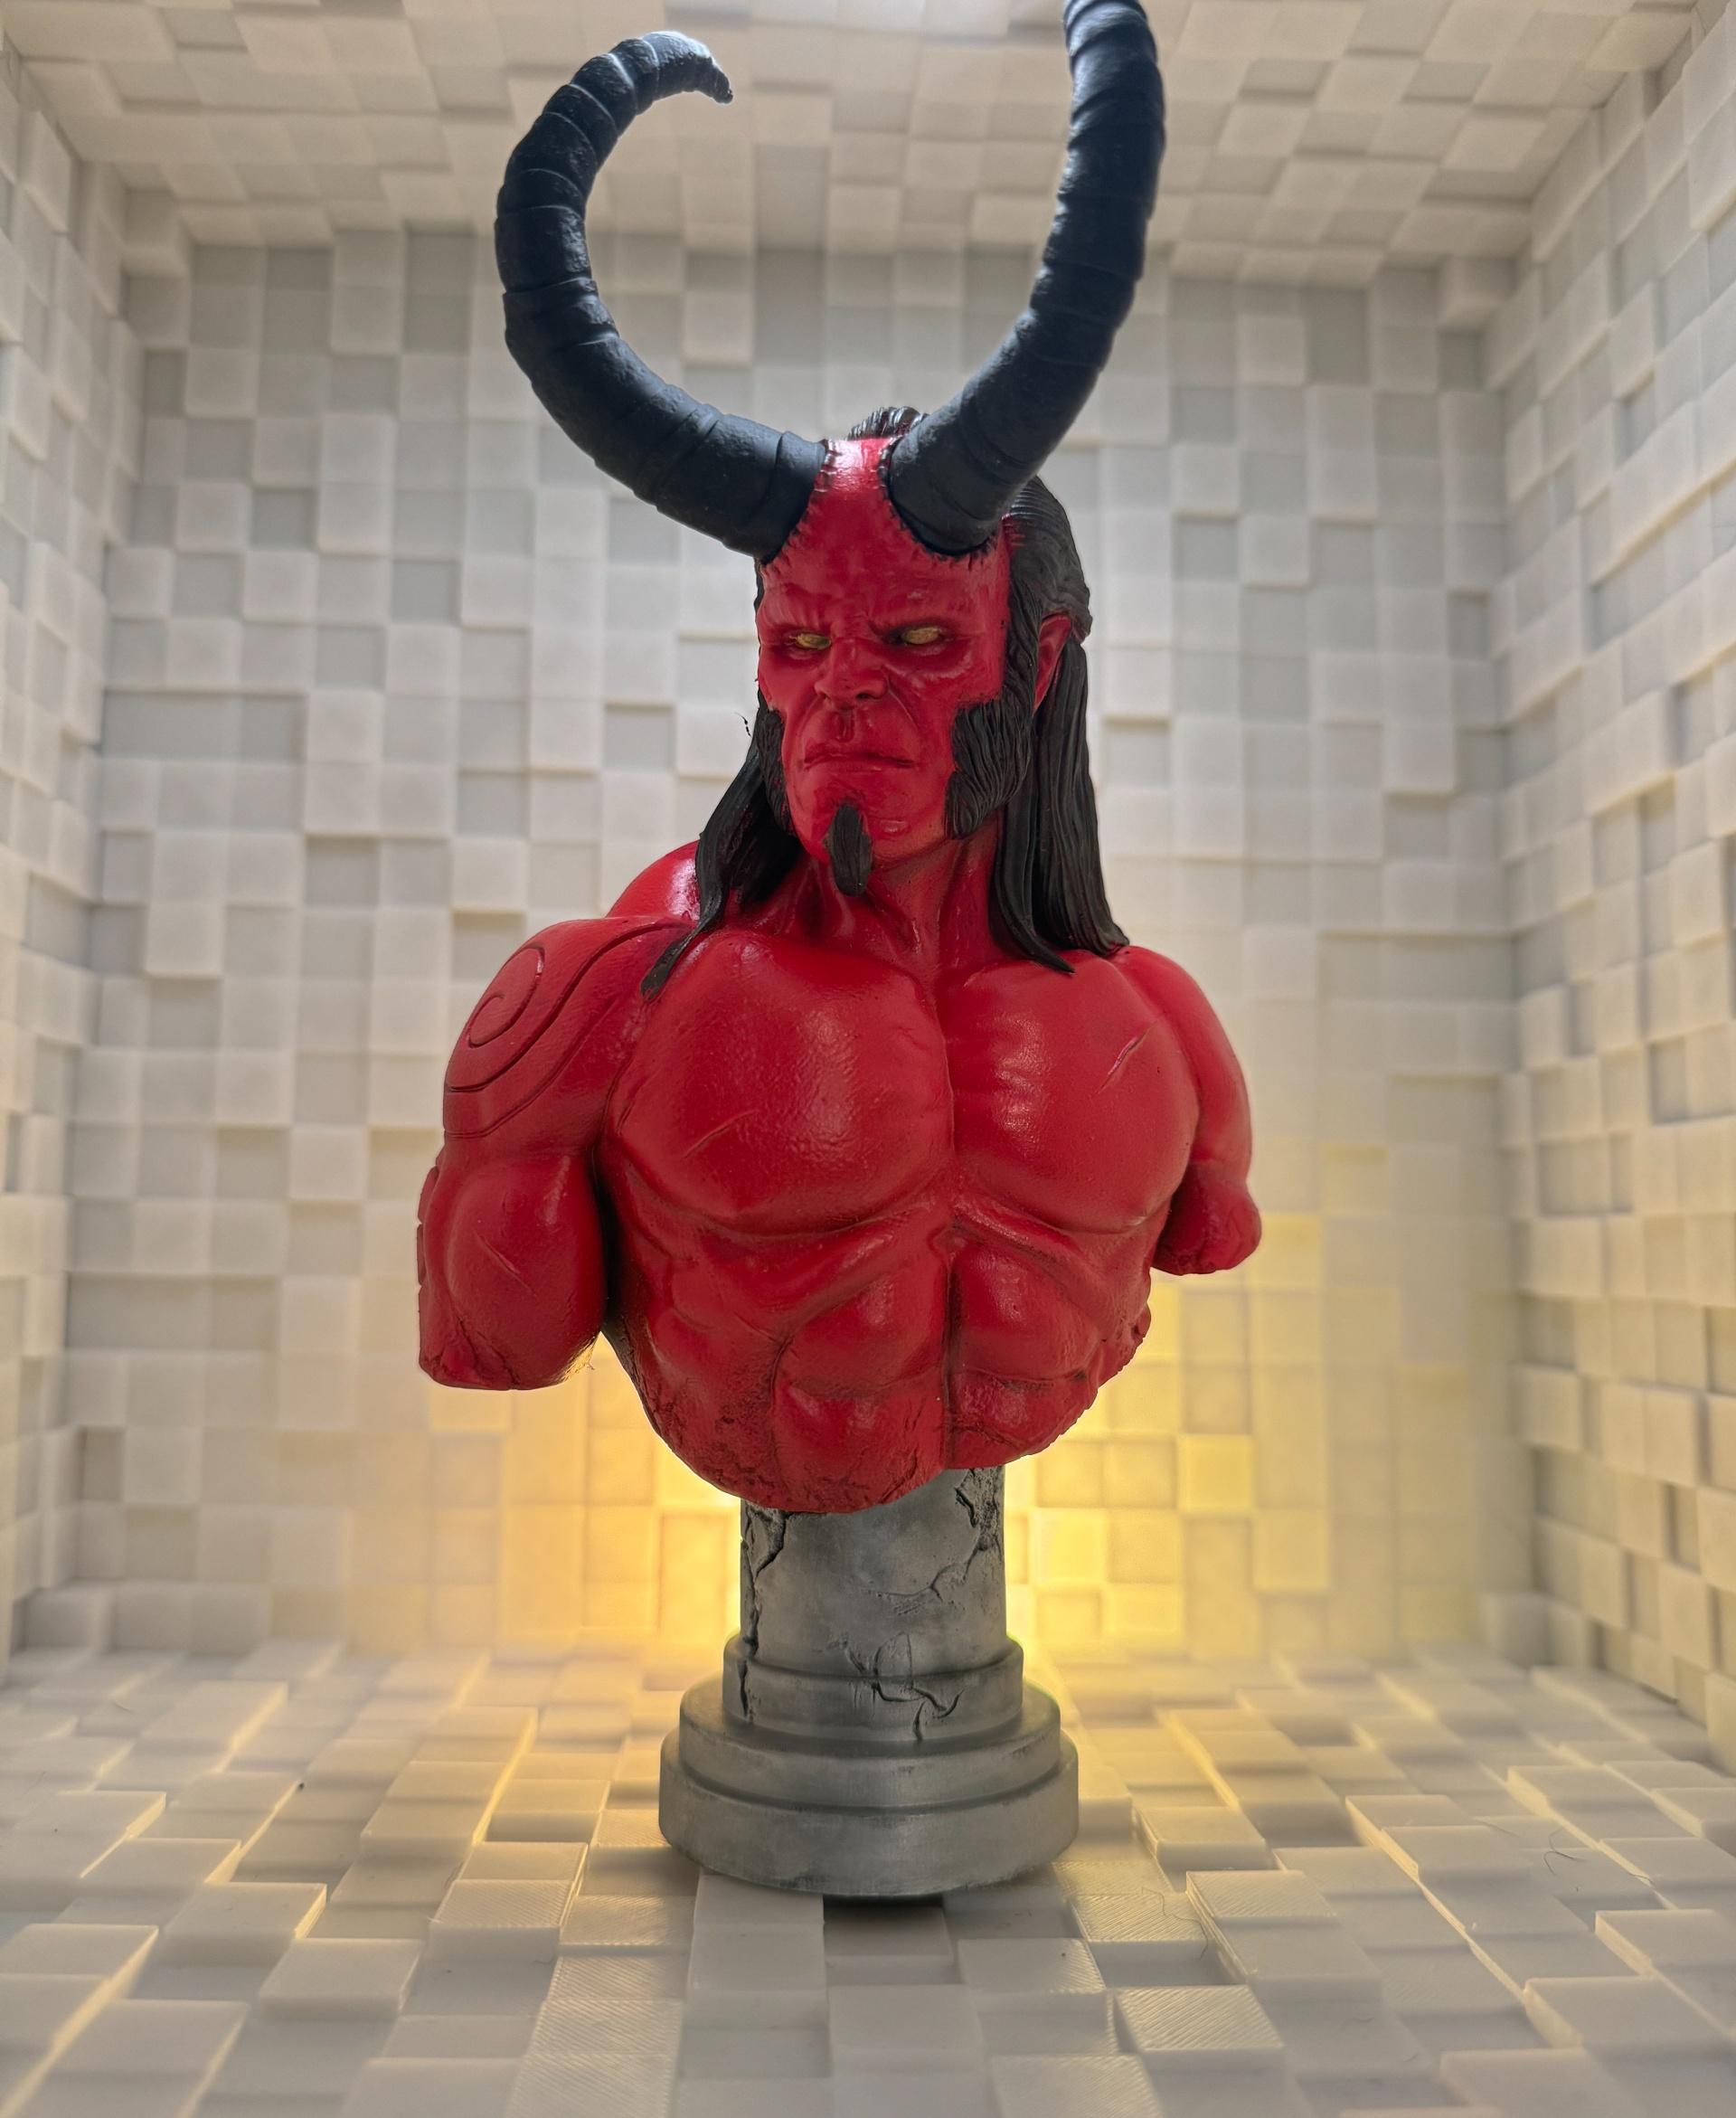 Hellboy bust  - I love Fotis' work so much, and this Hellboy bust is no exception. Between his sculpts and Charro's supports, these are just easy prints. My painting may suck, but the model itself is fantastic!

Printed on the Elegoo Saturn 2 with Elegoo Black ABS-like resin; spray painted red, and then used silver and black Rub-N-Buff for the pedastal and hair. A touch of yellow to make the eyes pop, and voila!

Thank you, Fotis! - 3d model